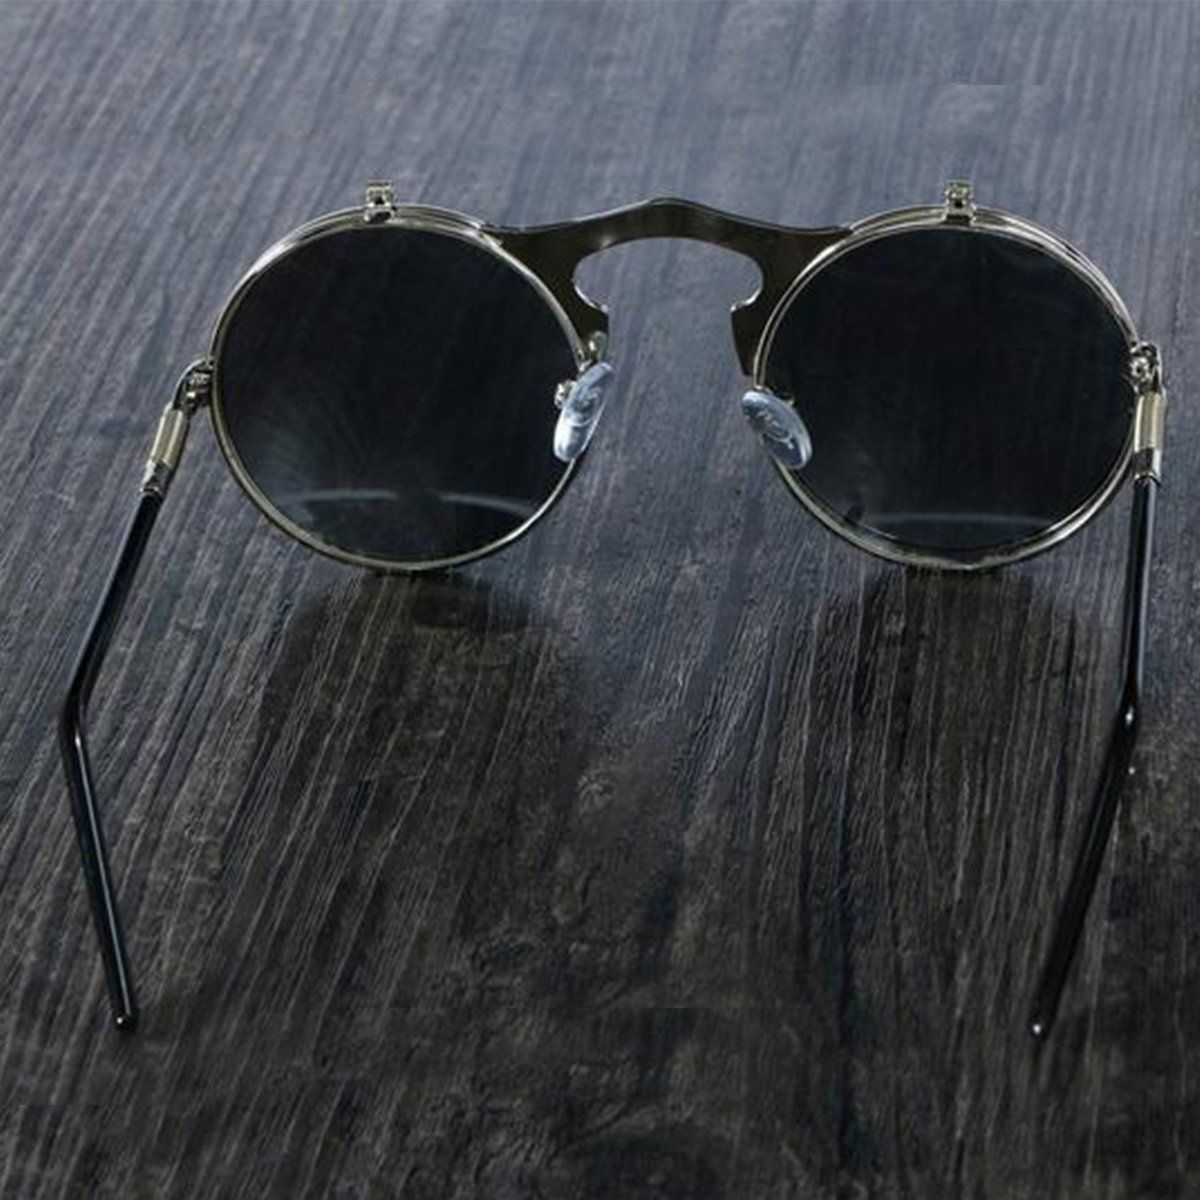 A pair of Steampunk Flip-Up Round Double Lens Sunglasses on top of a wooden table.